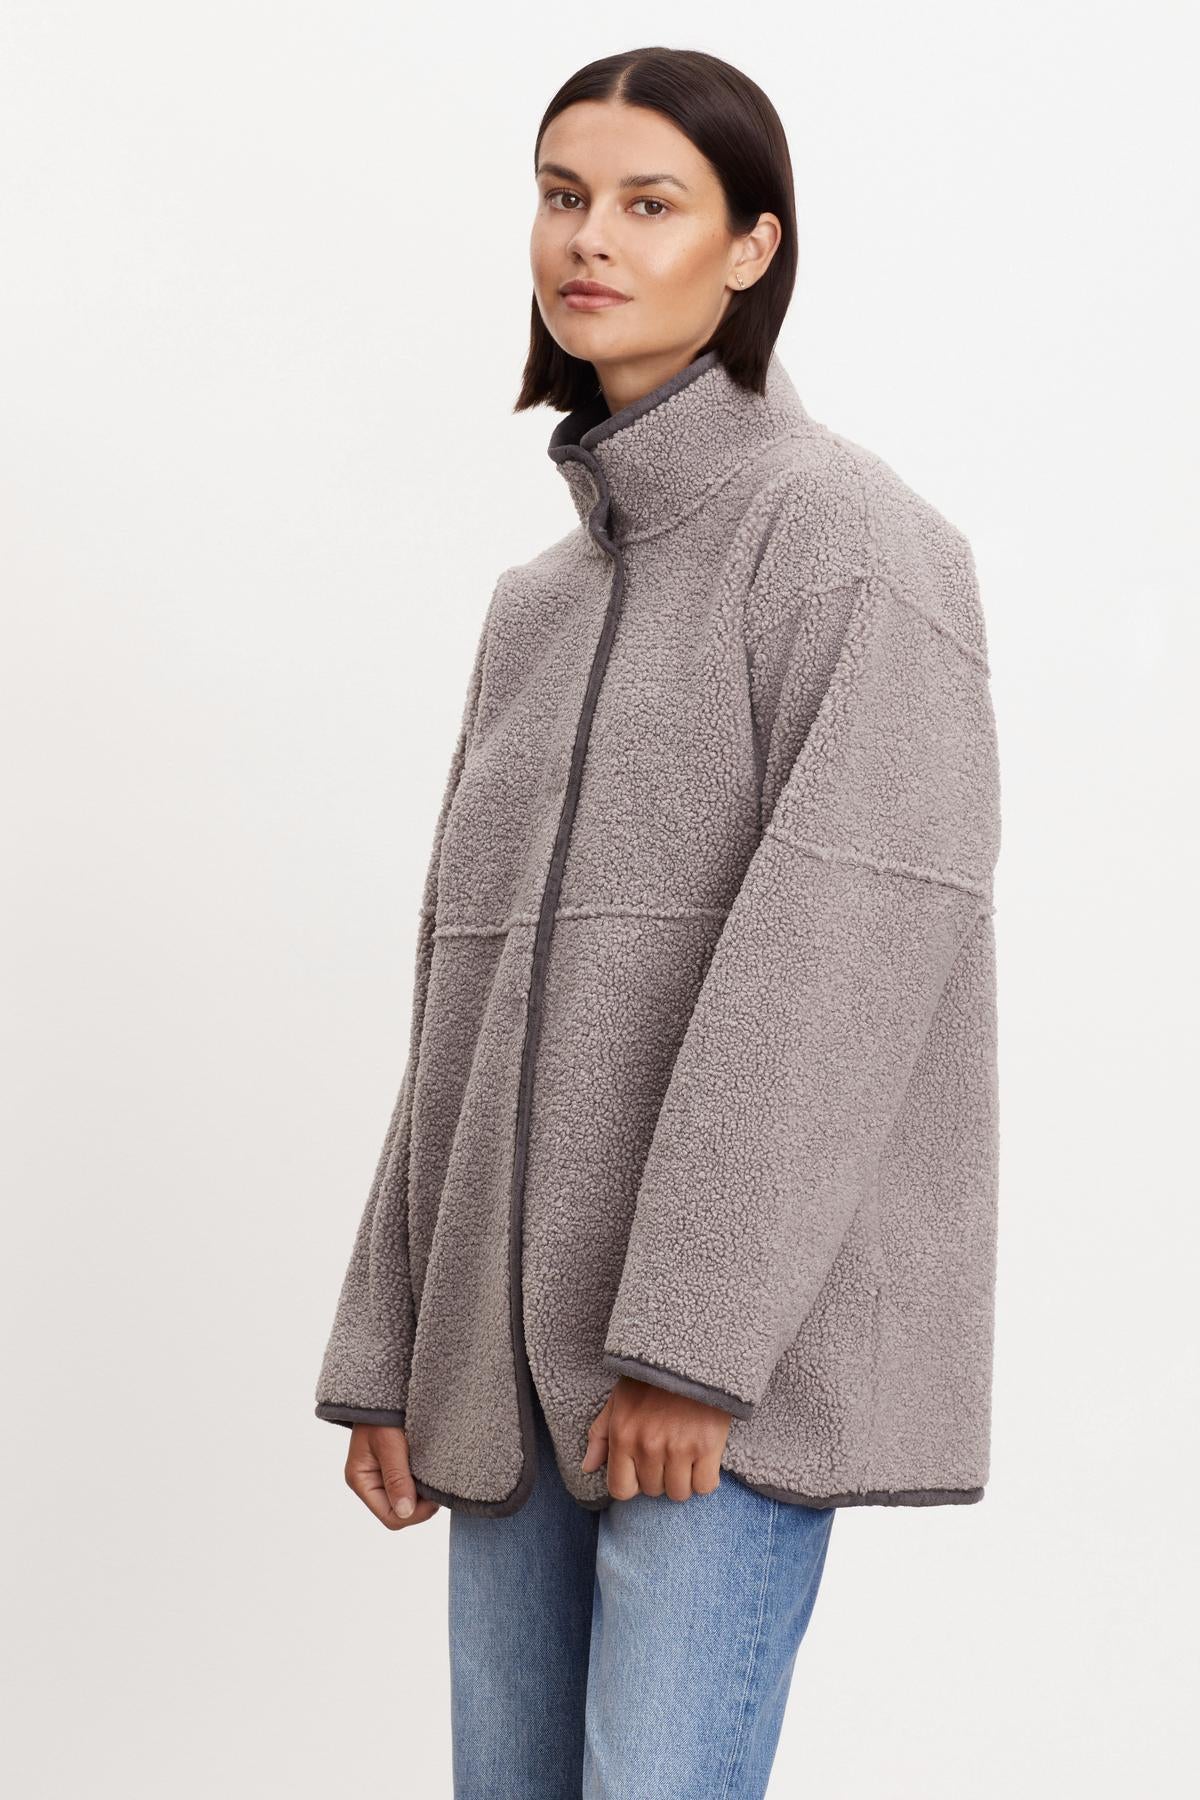   ALBANY LUX SHERPA REVERSIBLE JACKET 